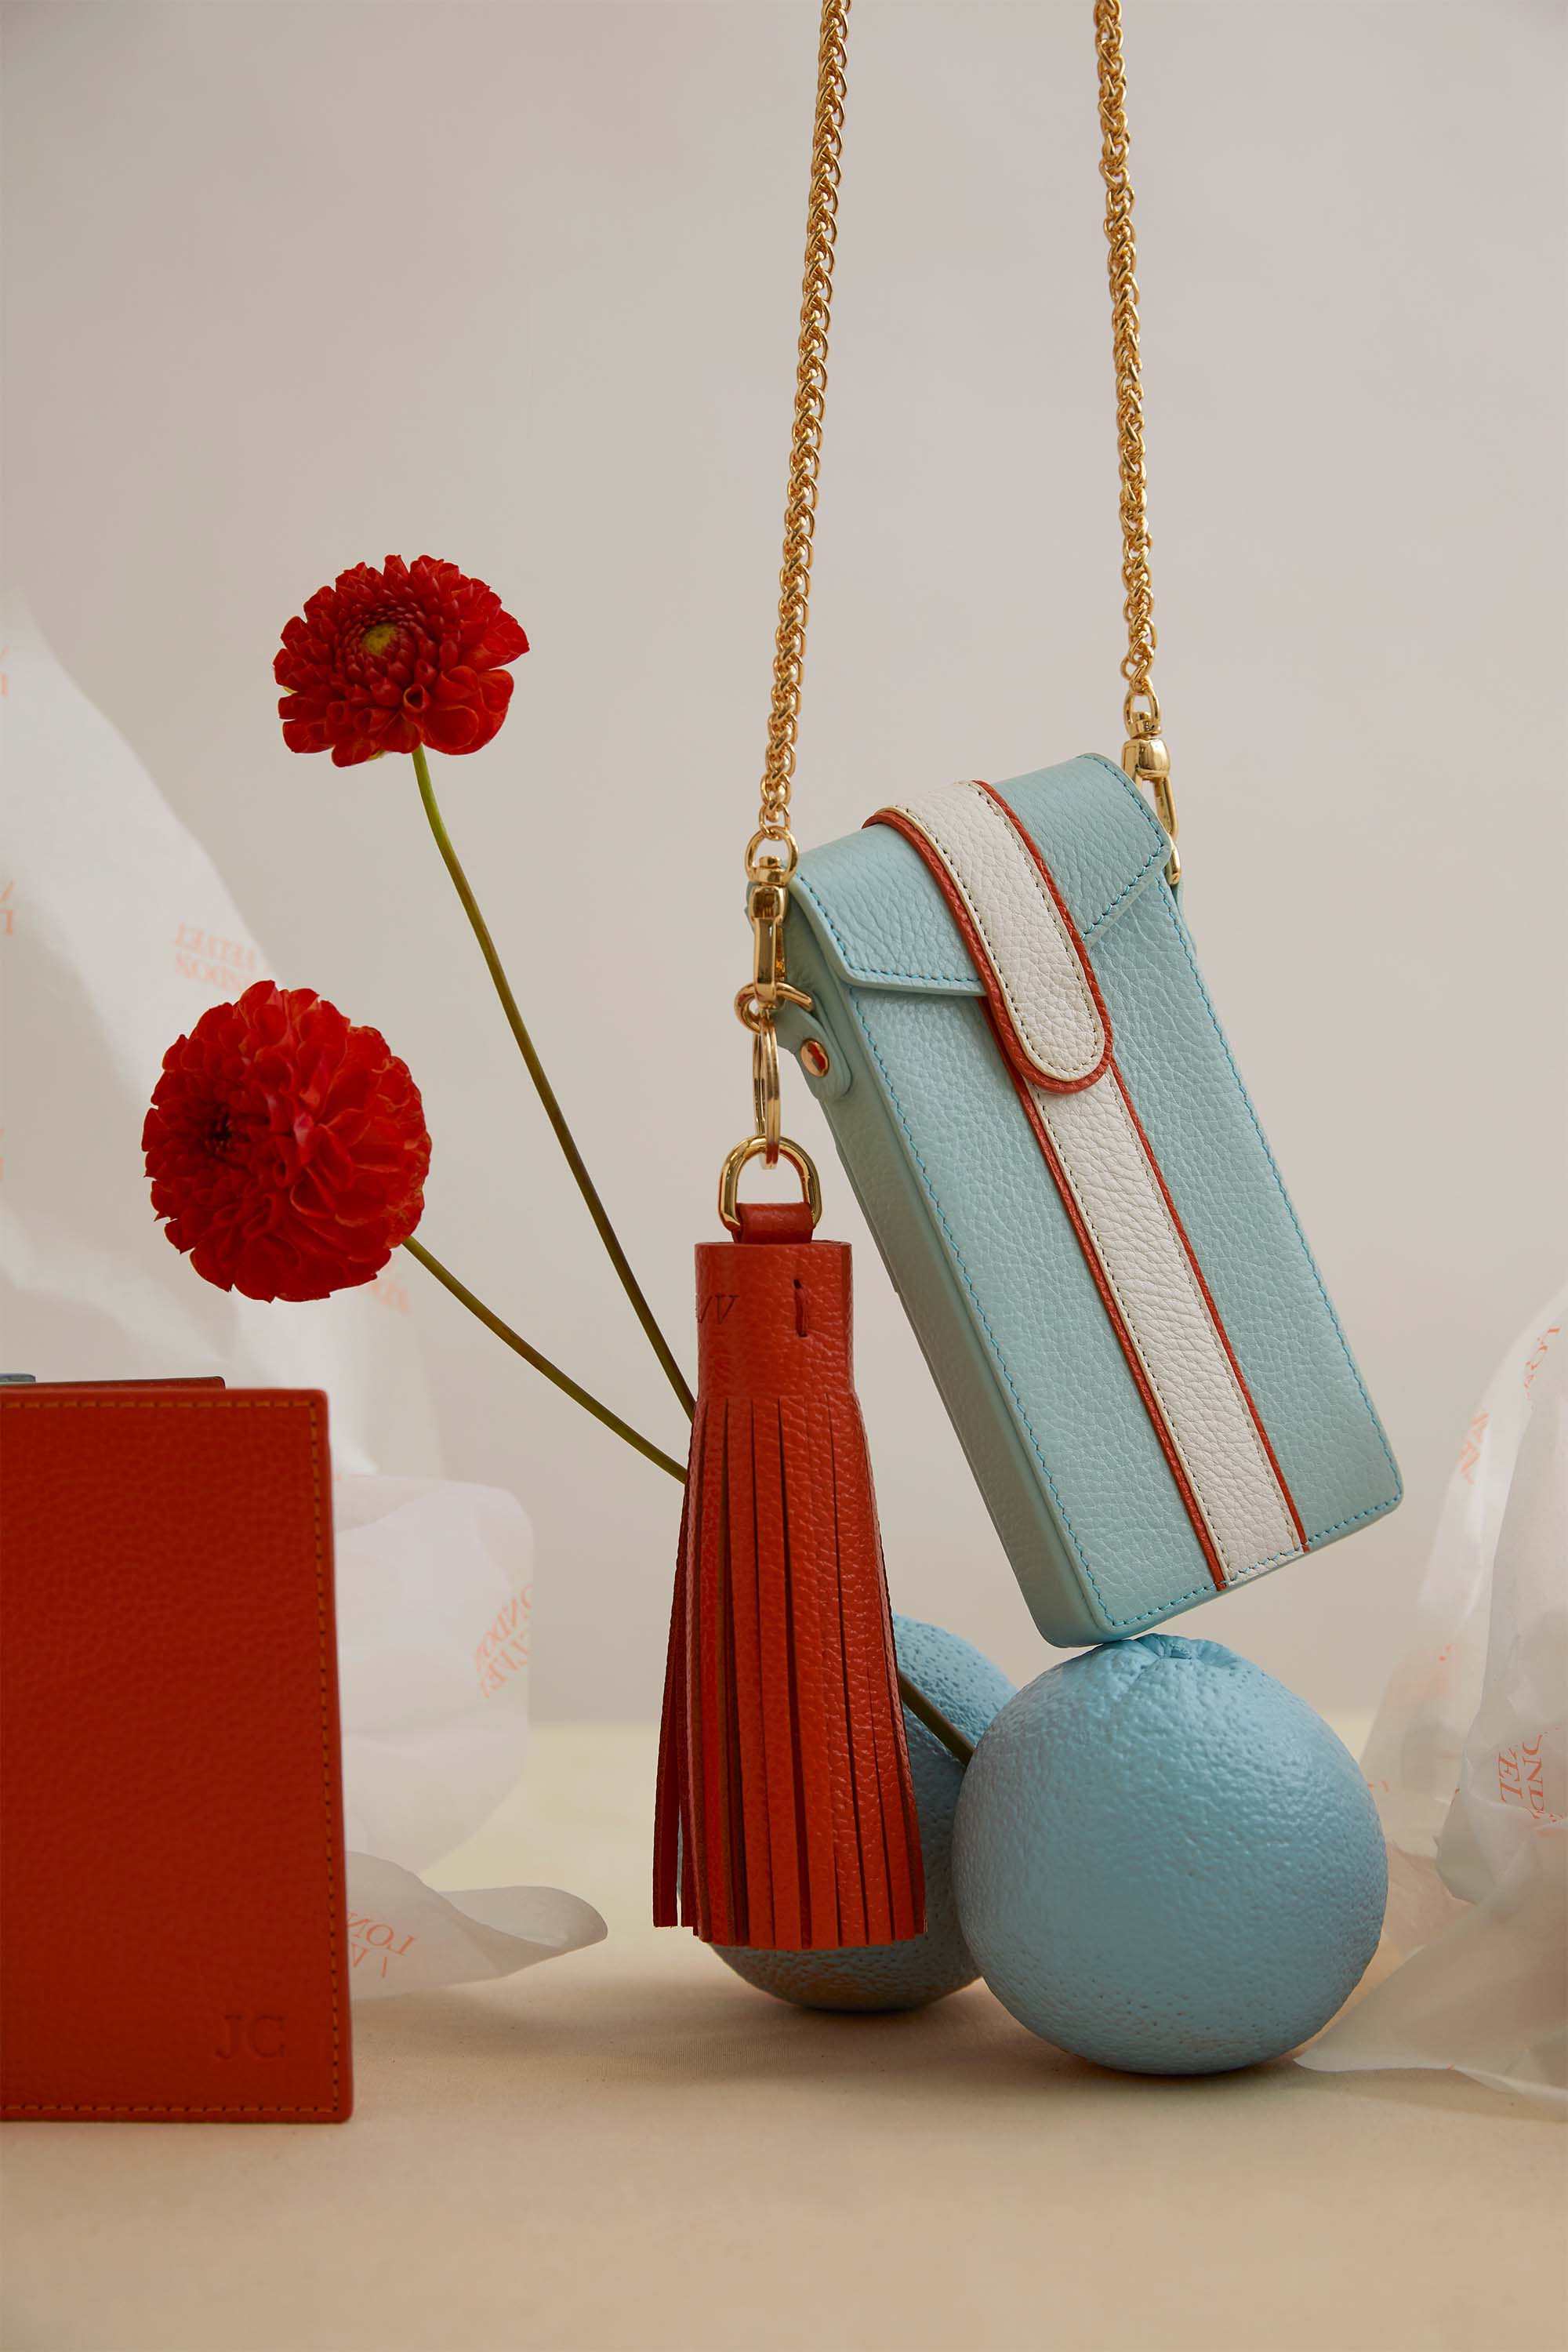 The Chunky Tassle, Bright Red